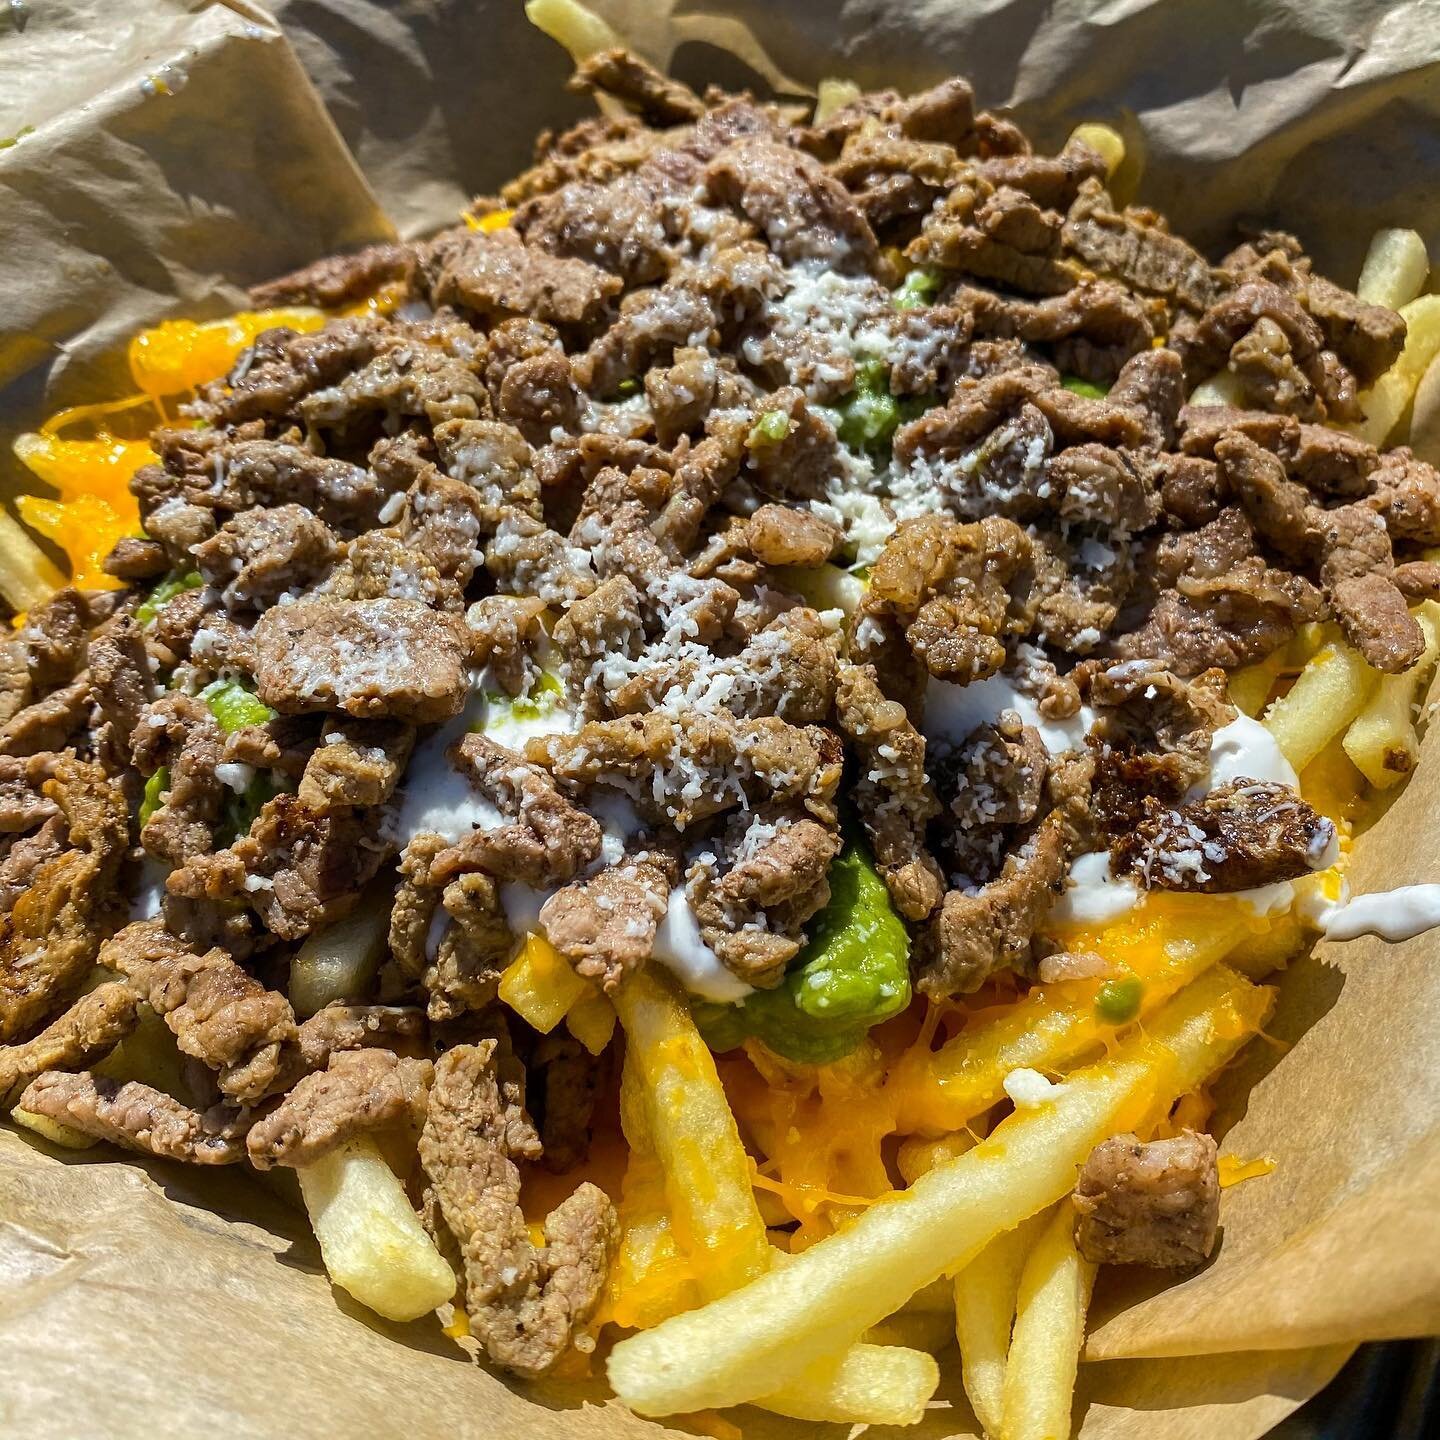 📍 Lolita&rsquo;s Mexican Food &bull; San Diego, CA

🍟 Carne asada fries

Can&rsquo;t visit San Diego without getting an order of carne asada fries! 😋 Our favorite carne asada fries are from @lolitastacoshop! The fries and the toppings, from the ca